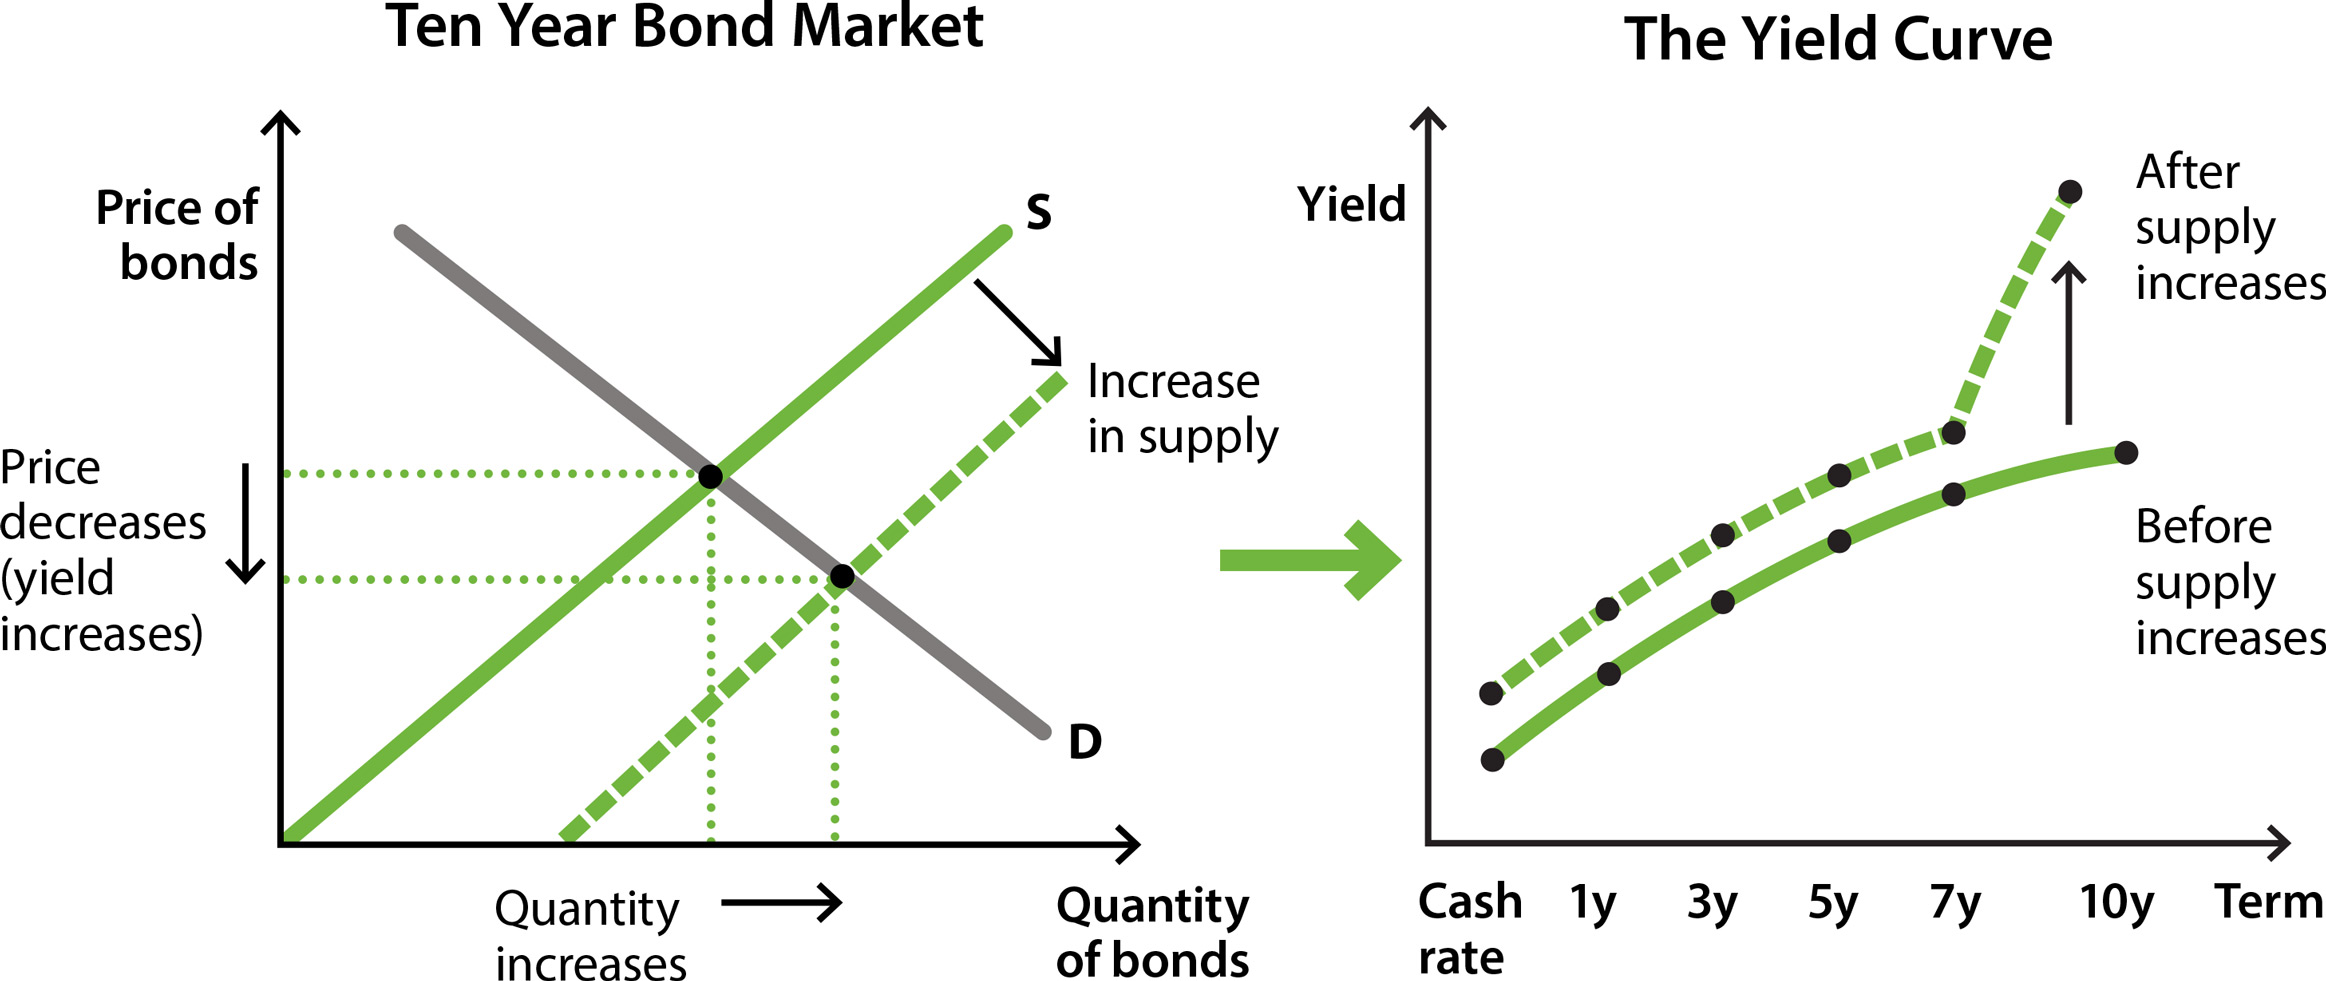 Image showing how an increase in supply in the market for 10 year bonds causes the price of 10 year bonds to fall and their yield to increase, leading the slope of the yield curve to increase.